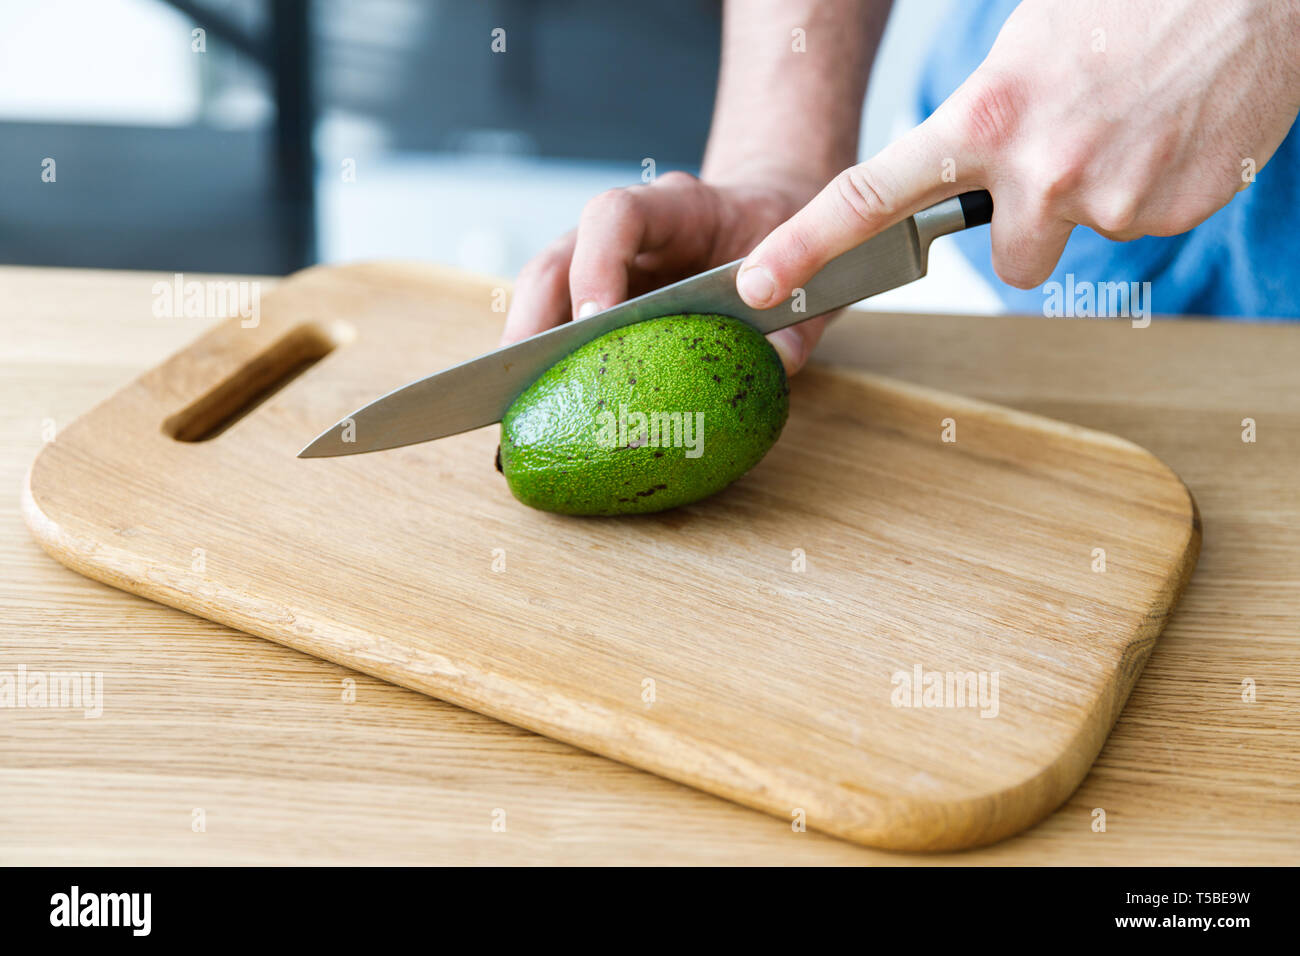 https://c8.alamy.com/comp/T5BE9W/a-young-boy-slicing-an-avocado-on-a-wooden-board-for-salad-T5BE9W.jpg